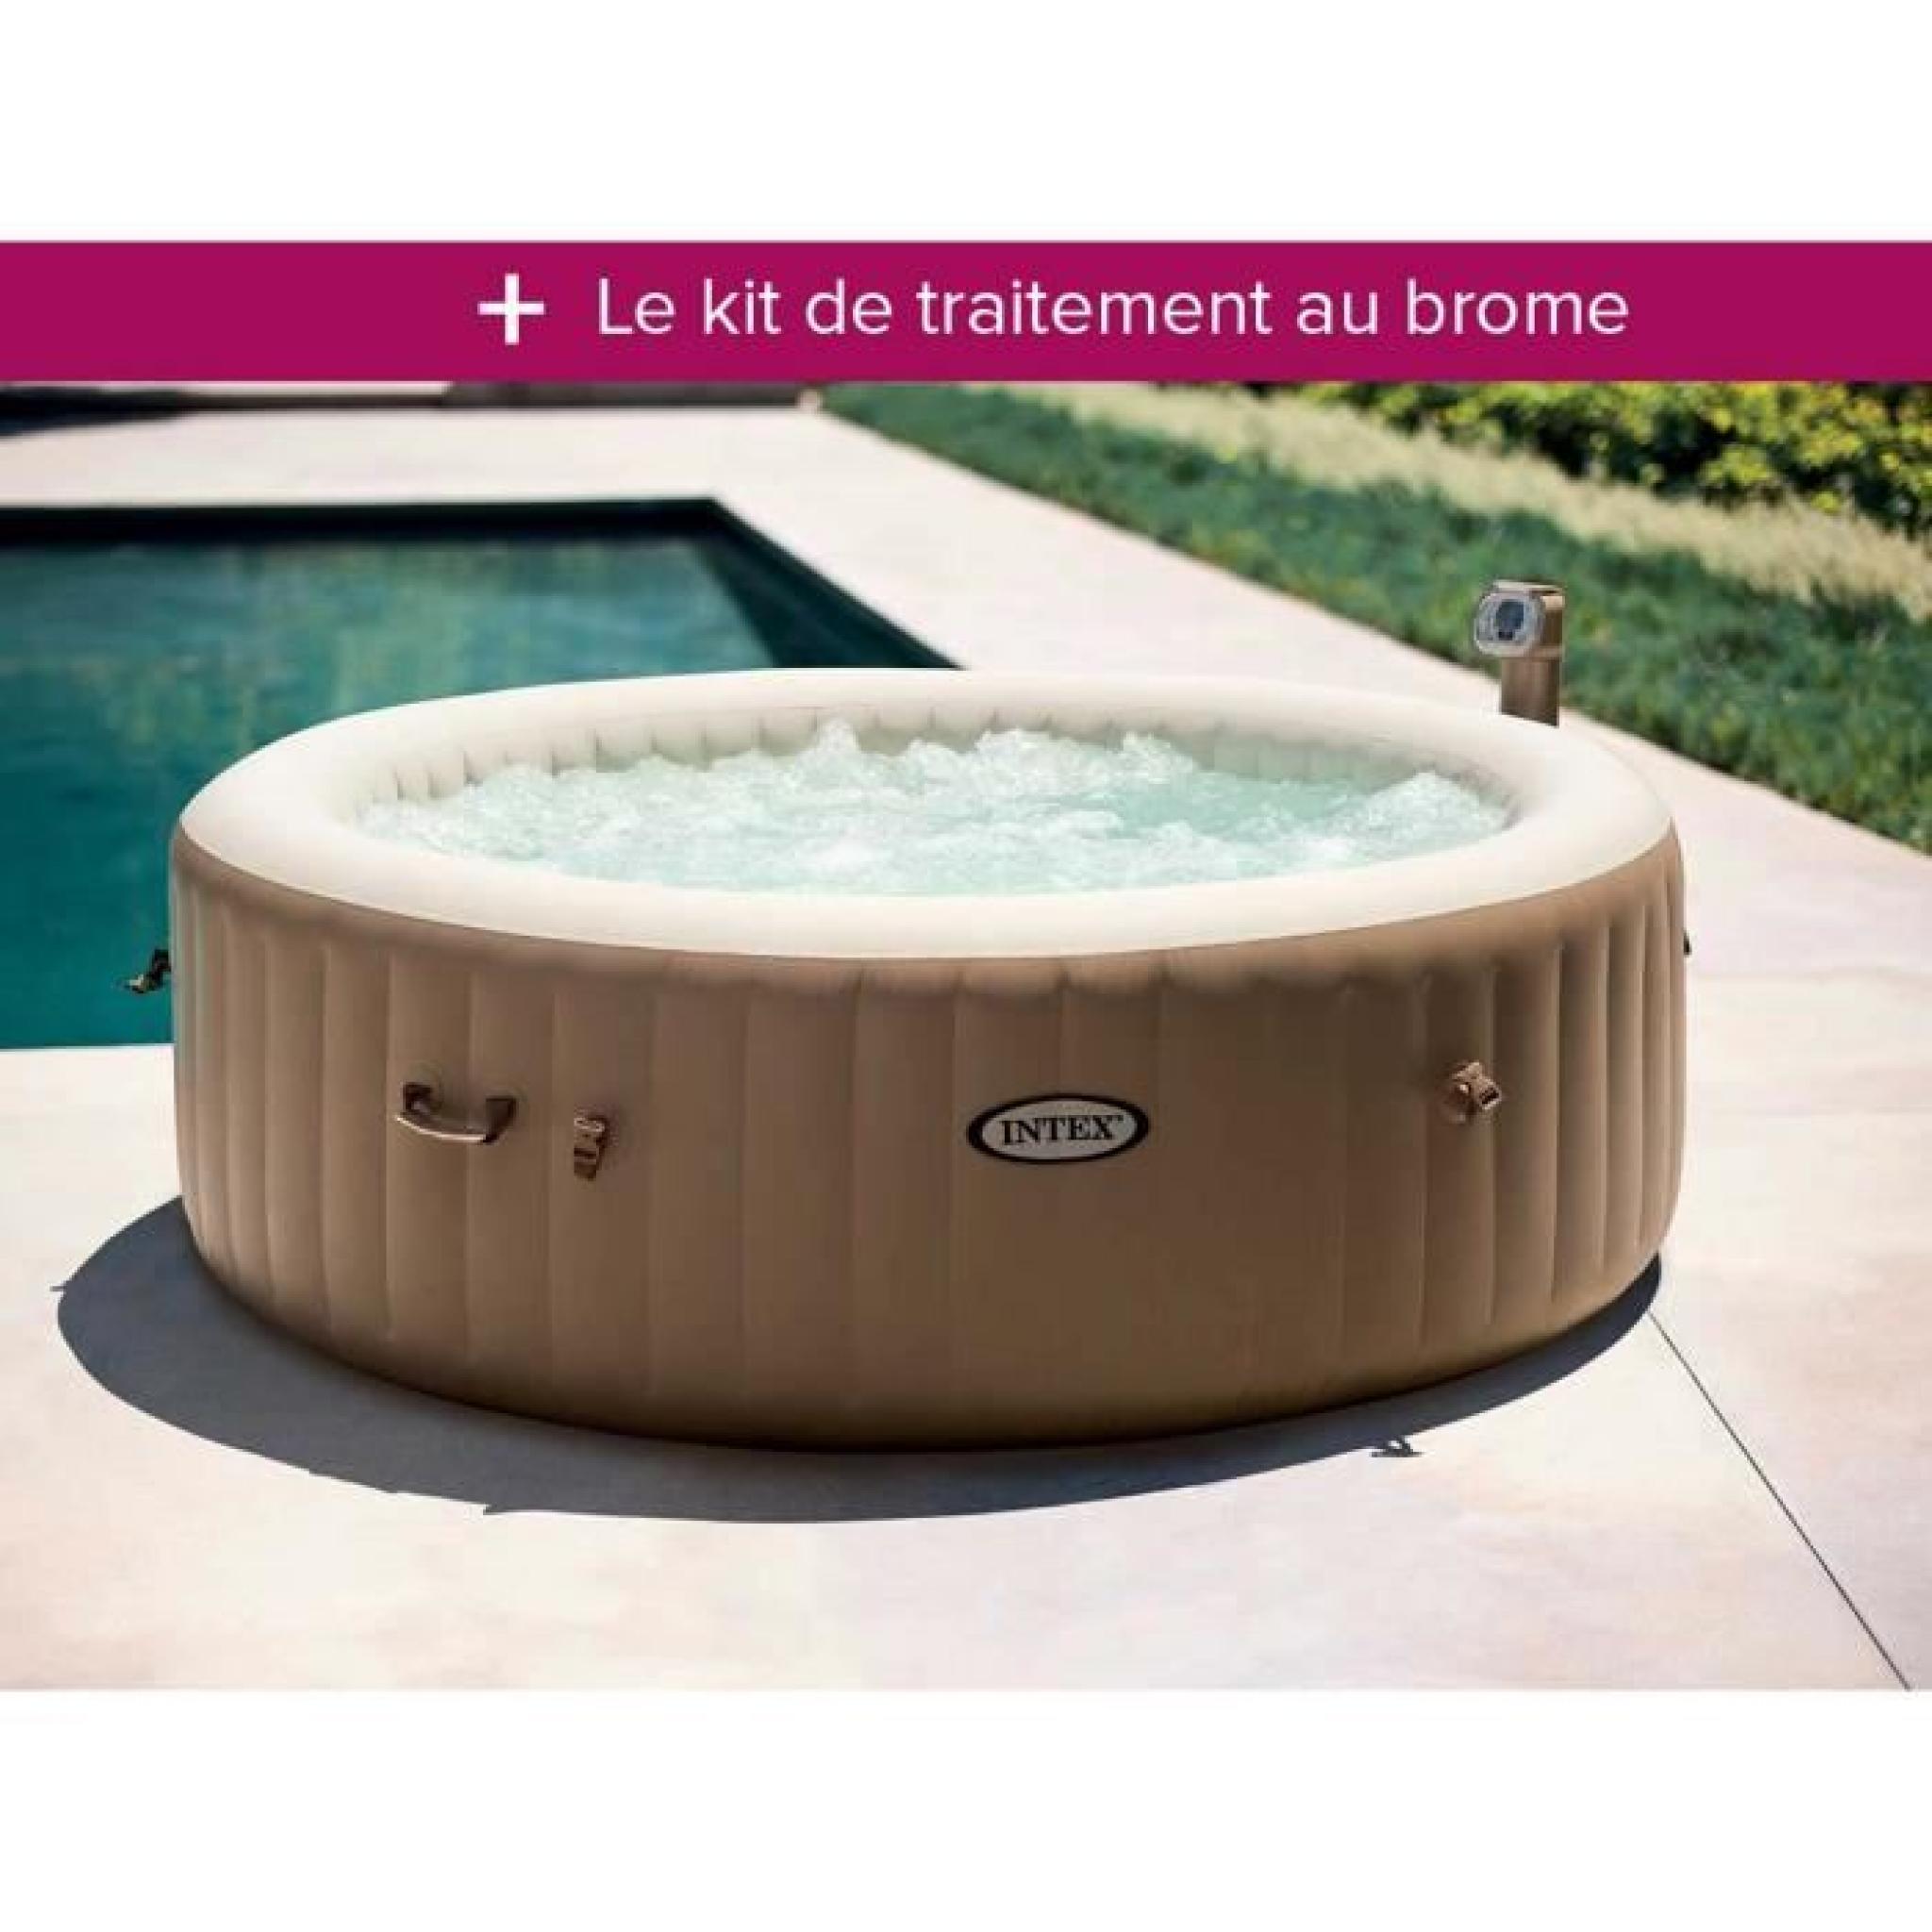 Spa gonflable Intex PureSpa rond Bulles 6 pl + Kit brome